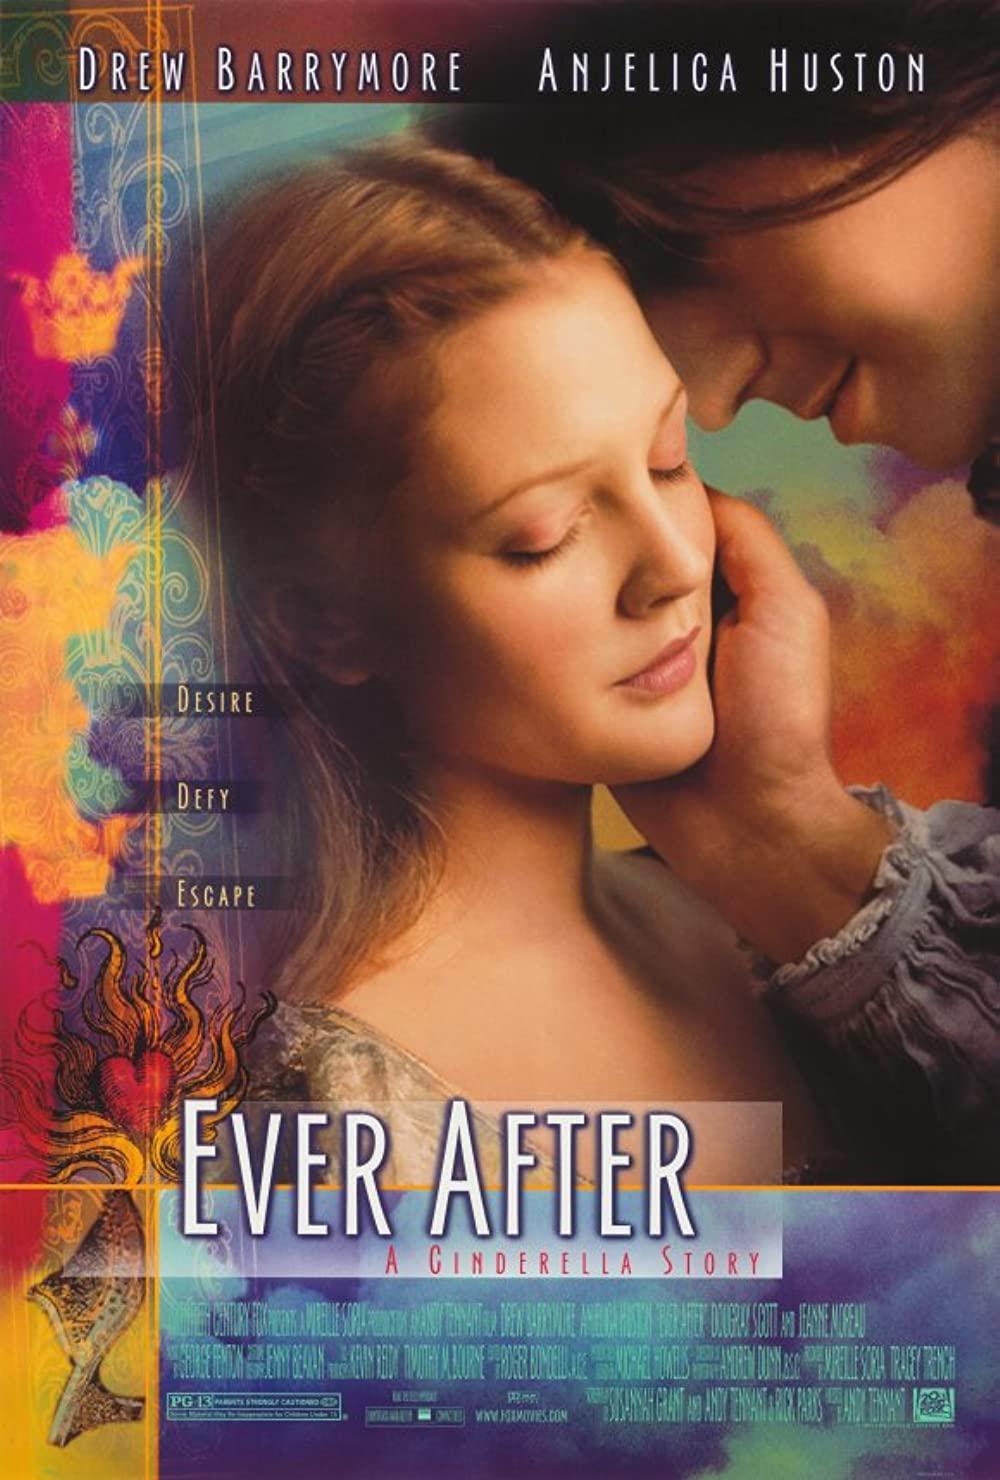 Ever After A Cinderella Story Plot